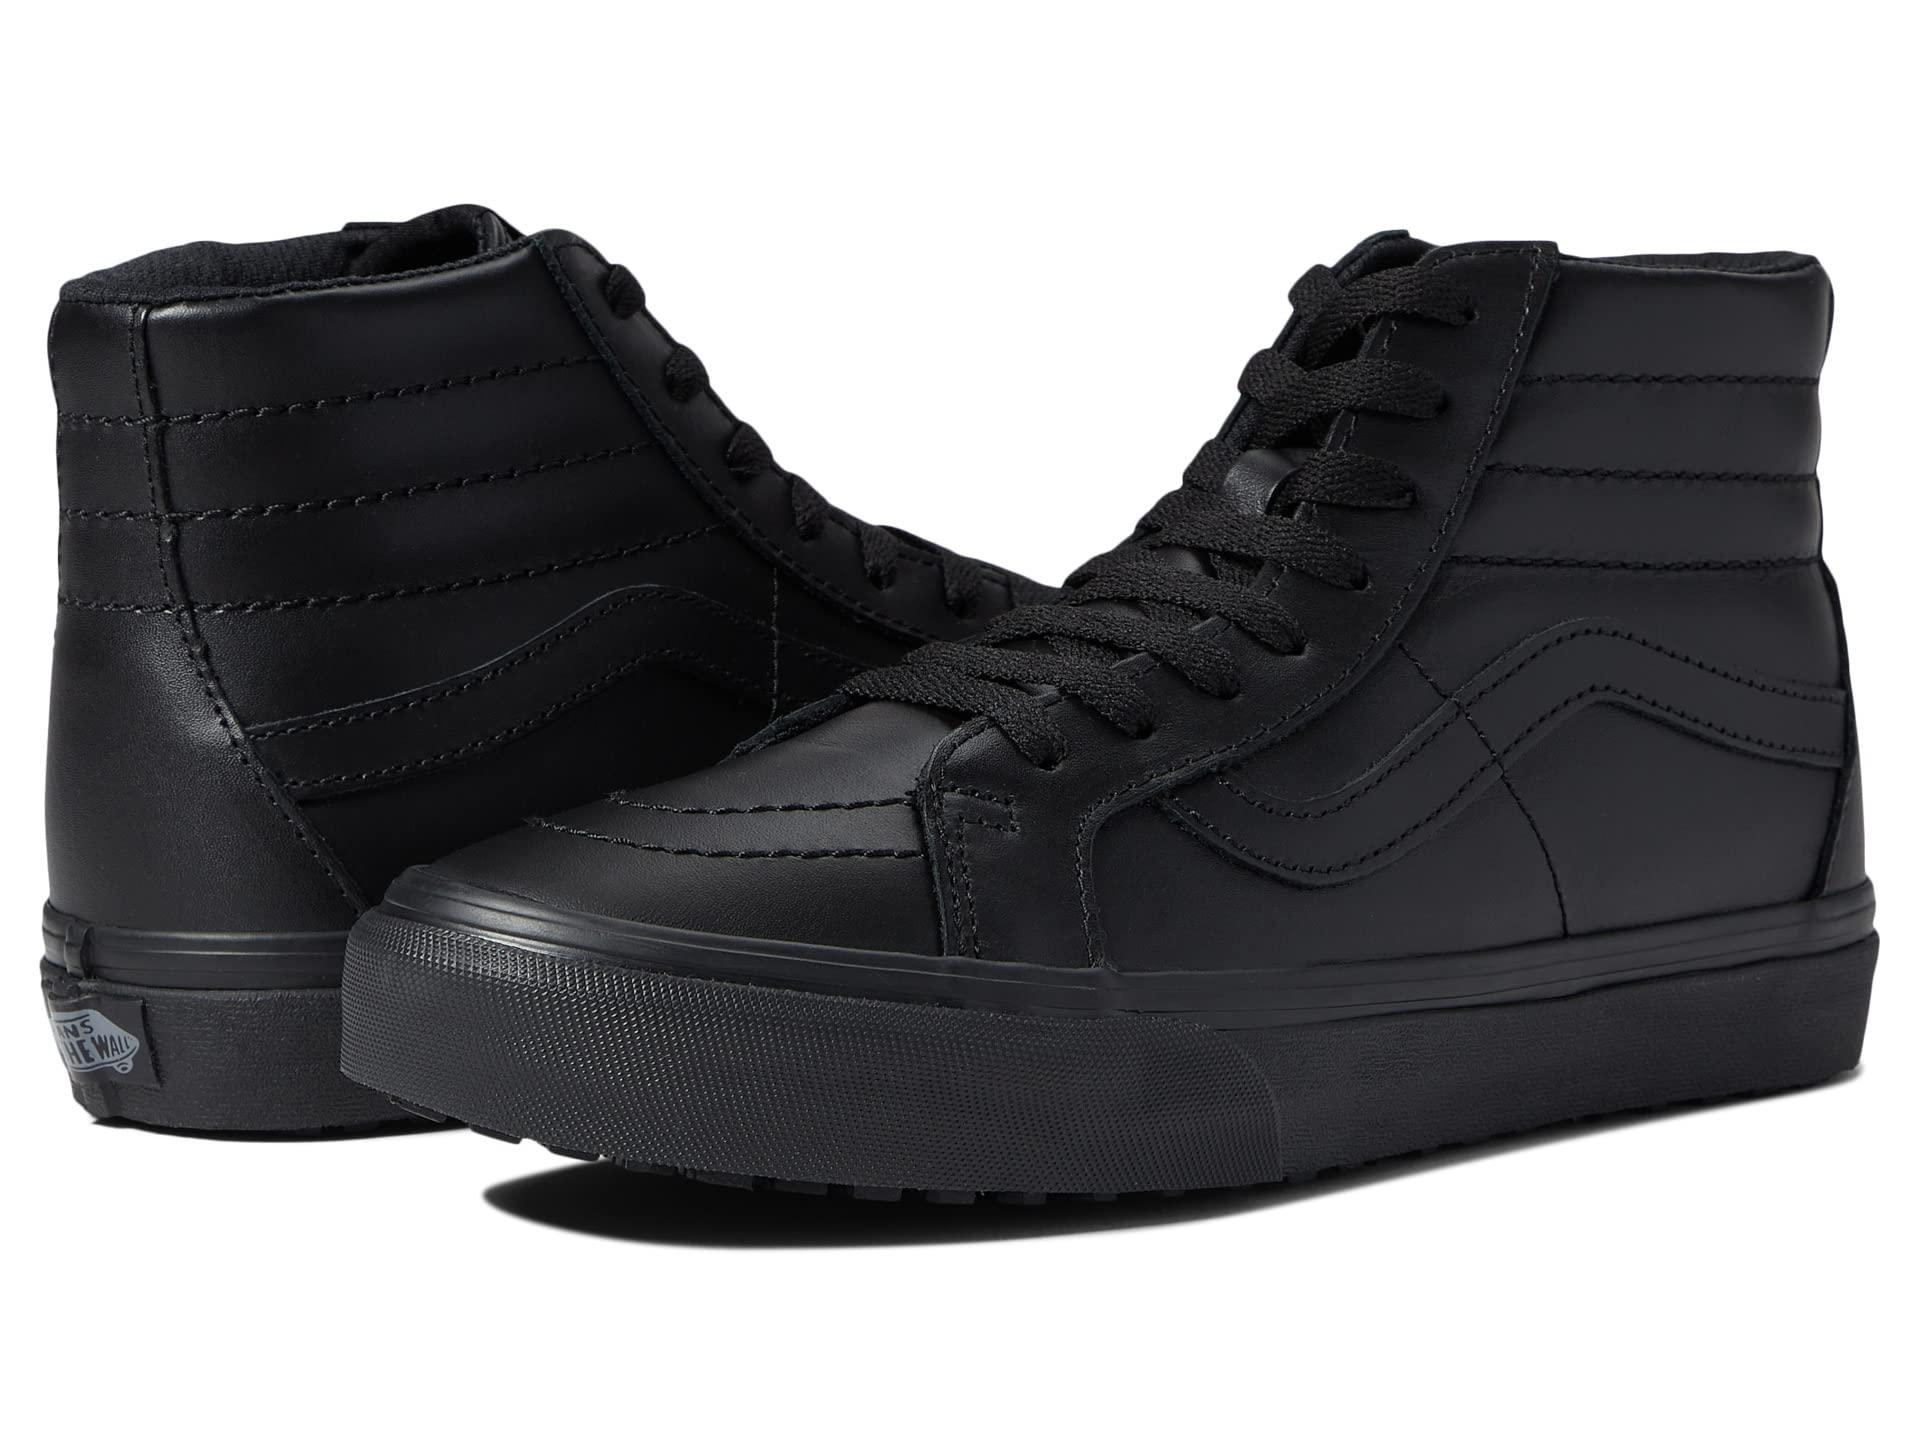 Vans Canvas Made For The Makers Sk8-hi Reissue Uc in Black | Lyst